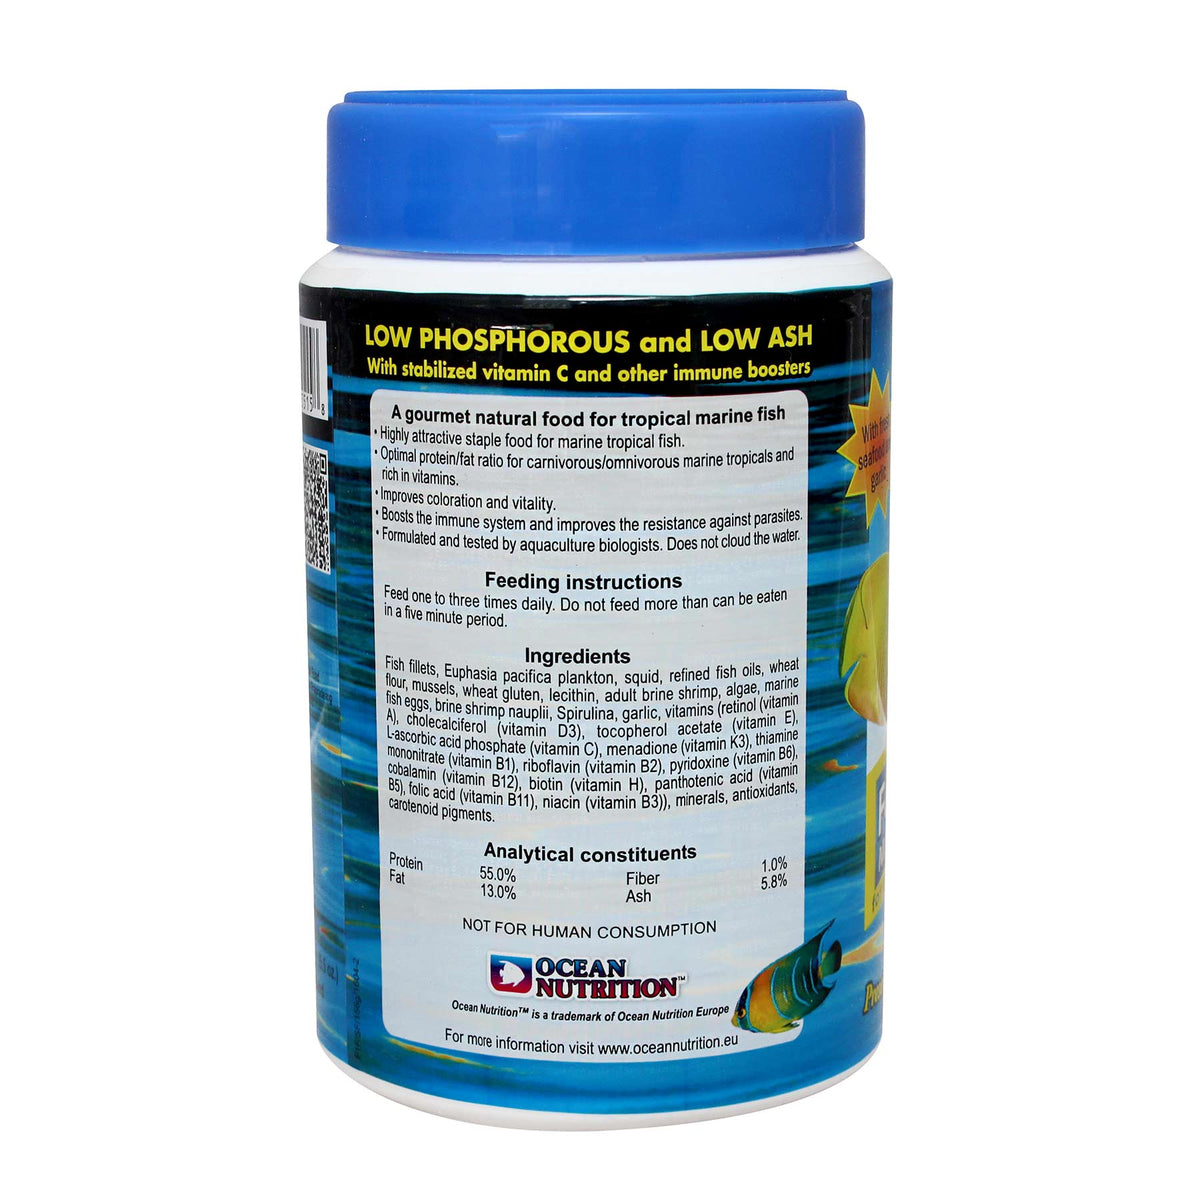 Ocean Nutrition Formula One Flakes for Marine Fish